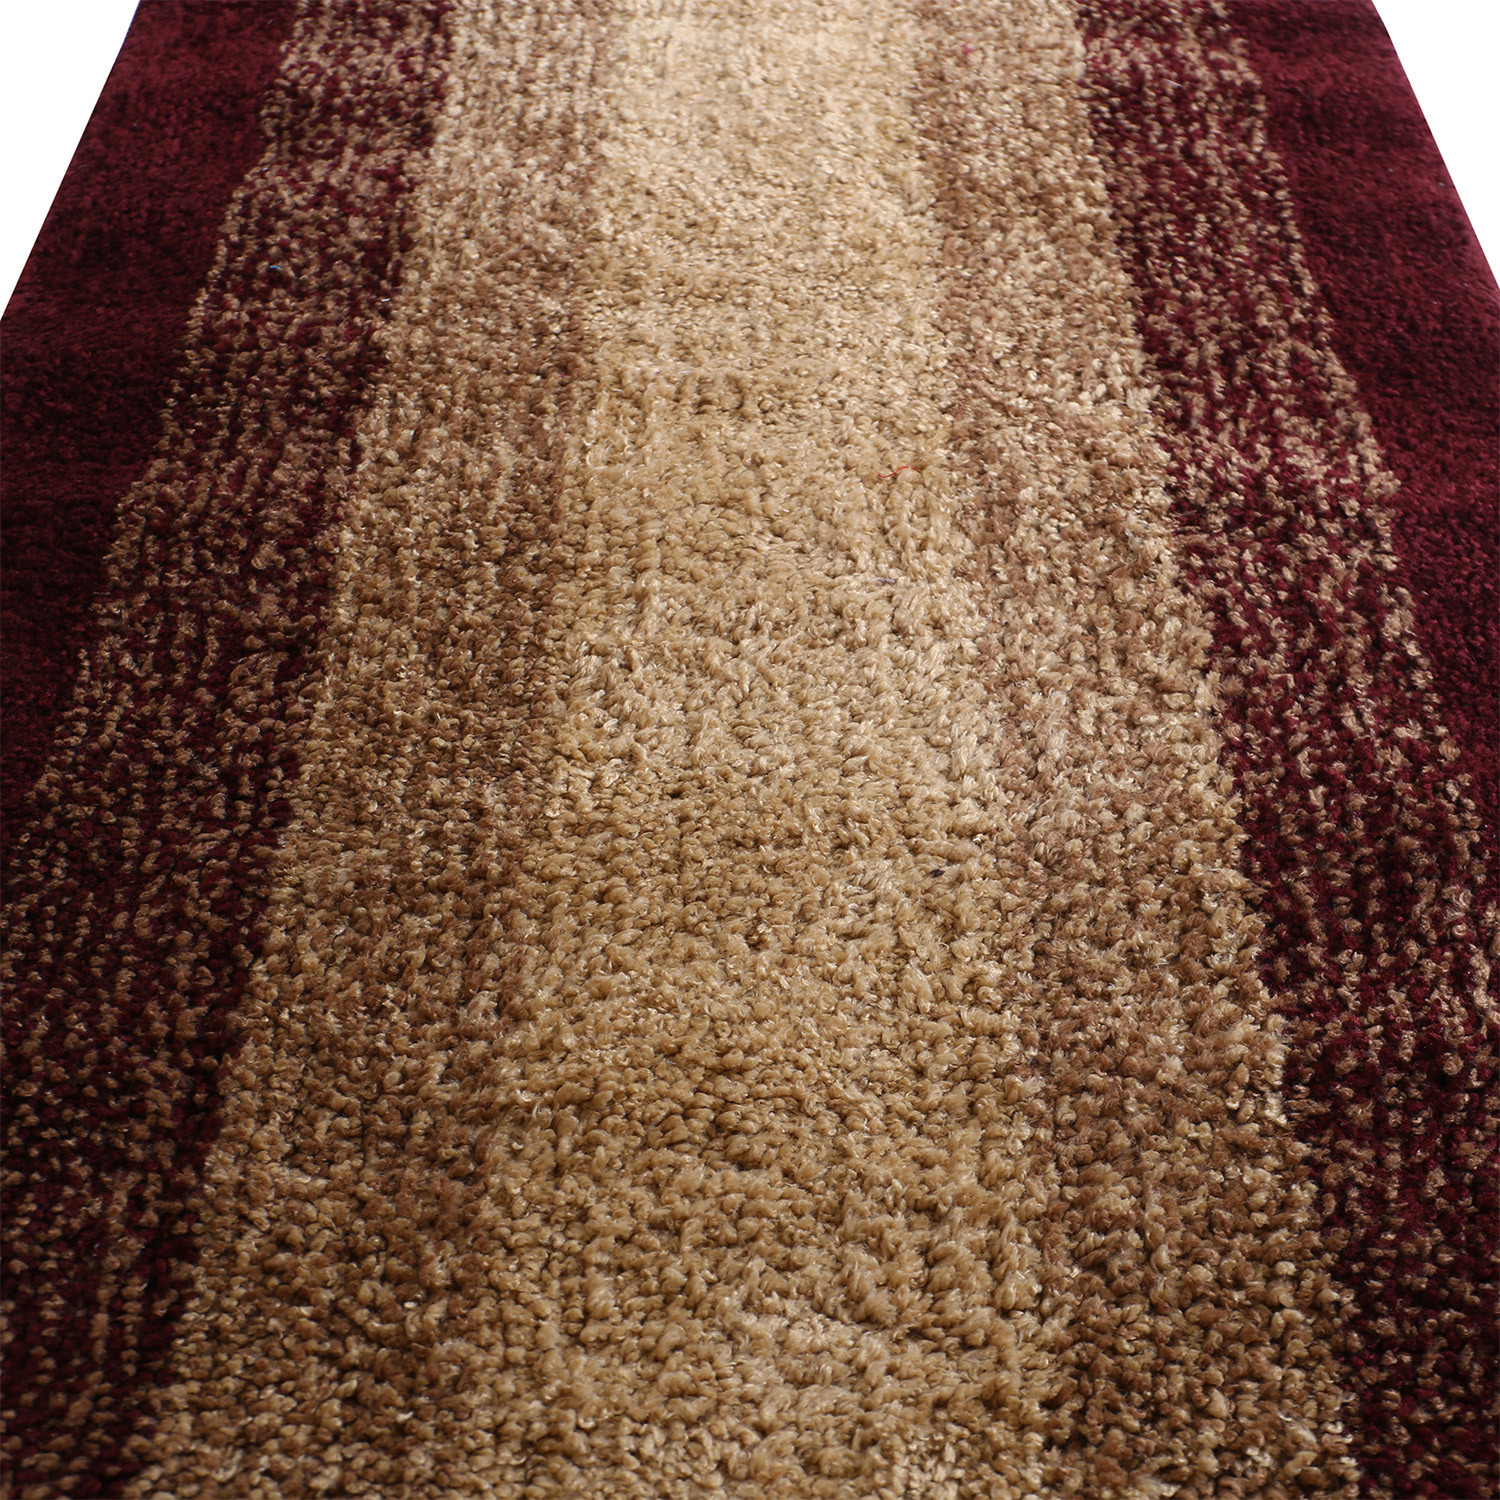 Kuber Industries Shaggy Carpet|Polyester Bedside Runner,Soft Rug For Hall,Offices,Kitchens,Bedroom,Floor Home Décor,5 x 2 Ft.(Maroon)